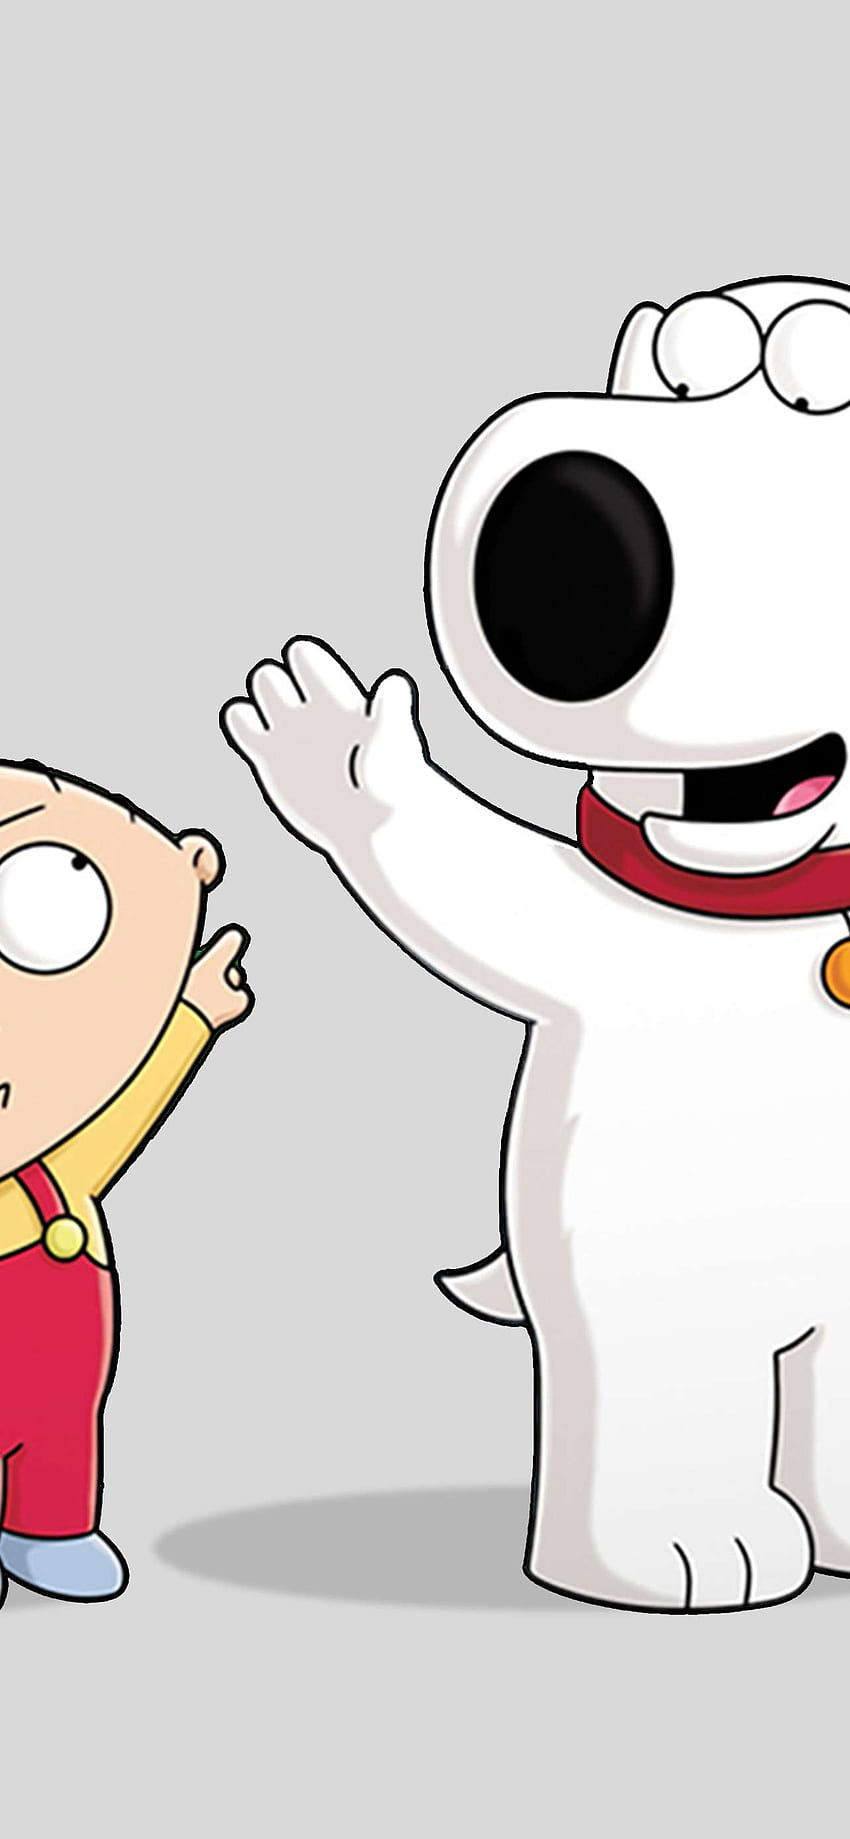 gangster stewie griffin coloring pages